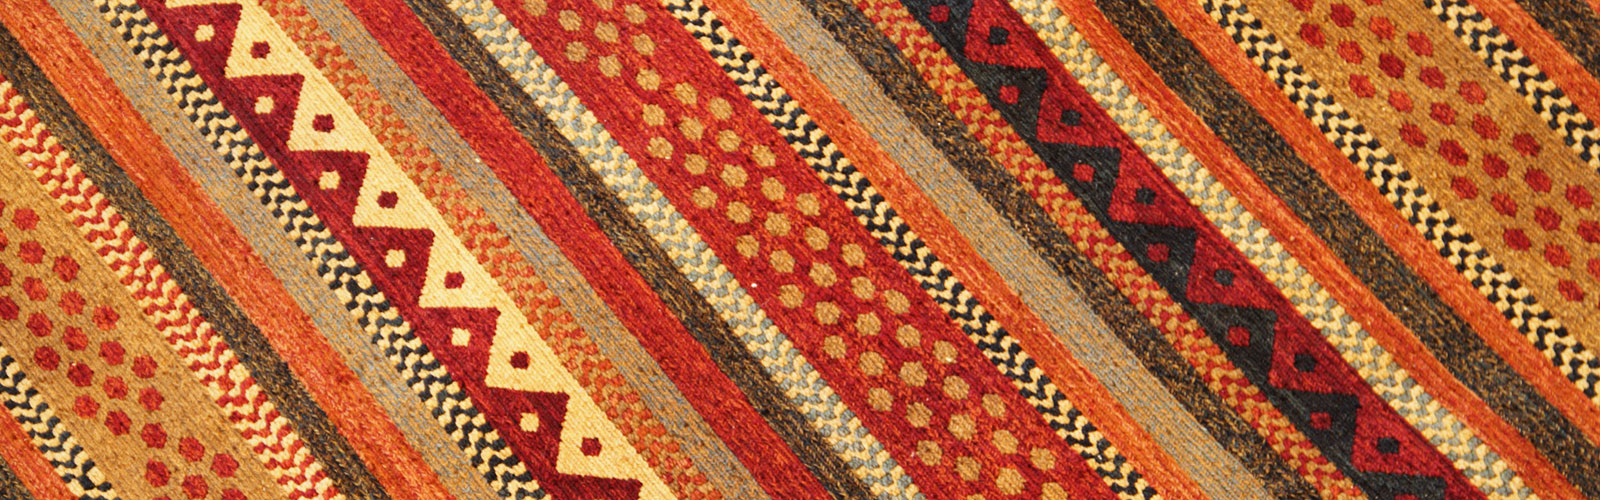 brown, orange, and yellow embroidered tapestry